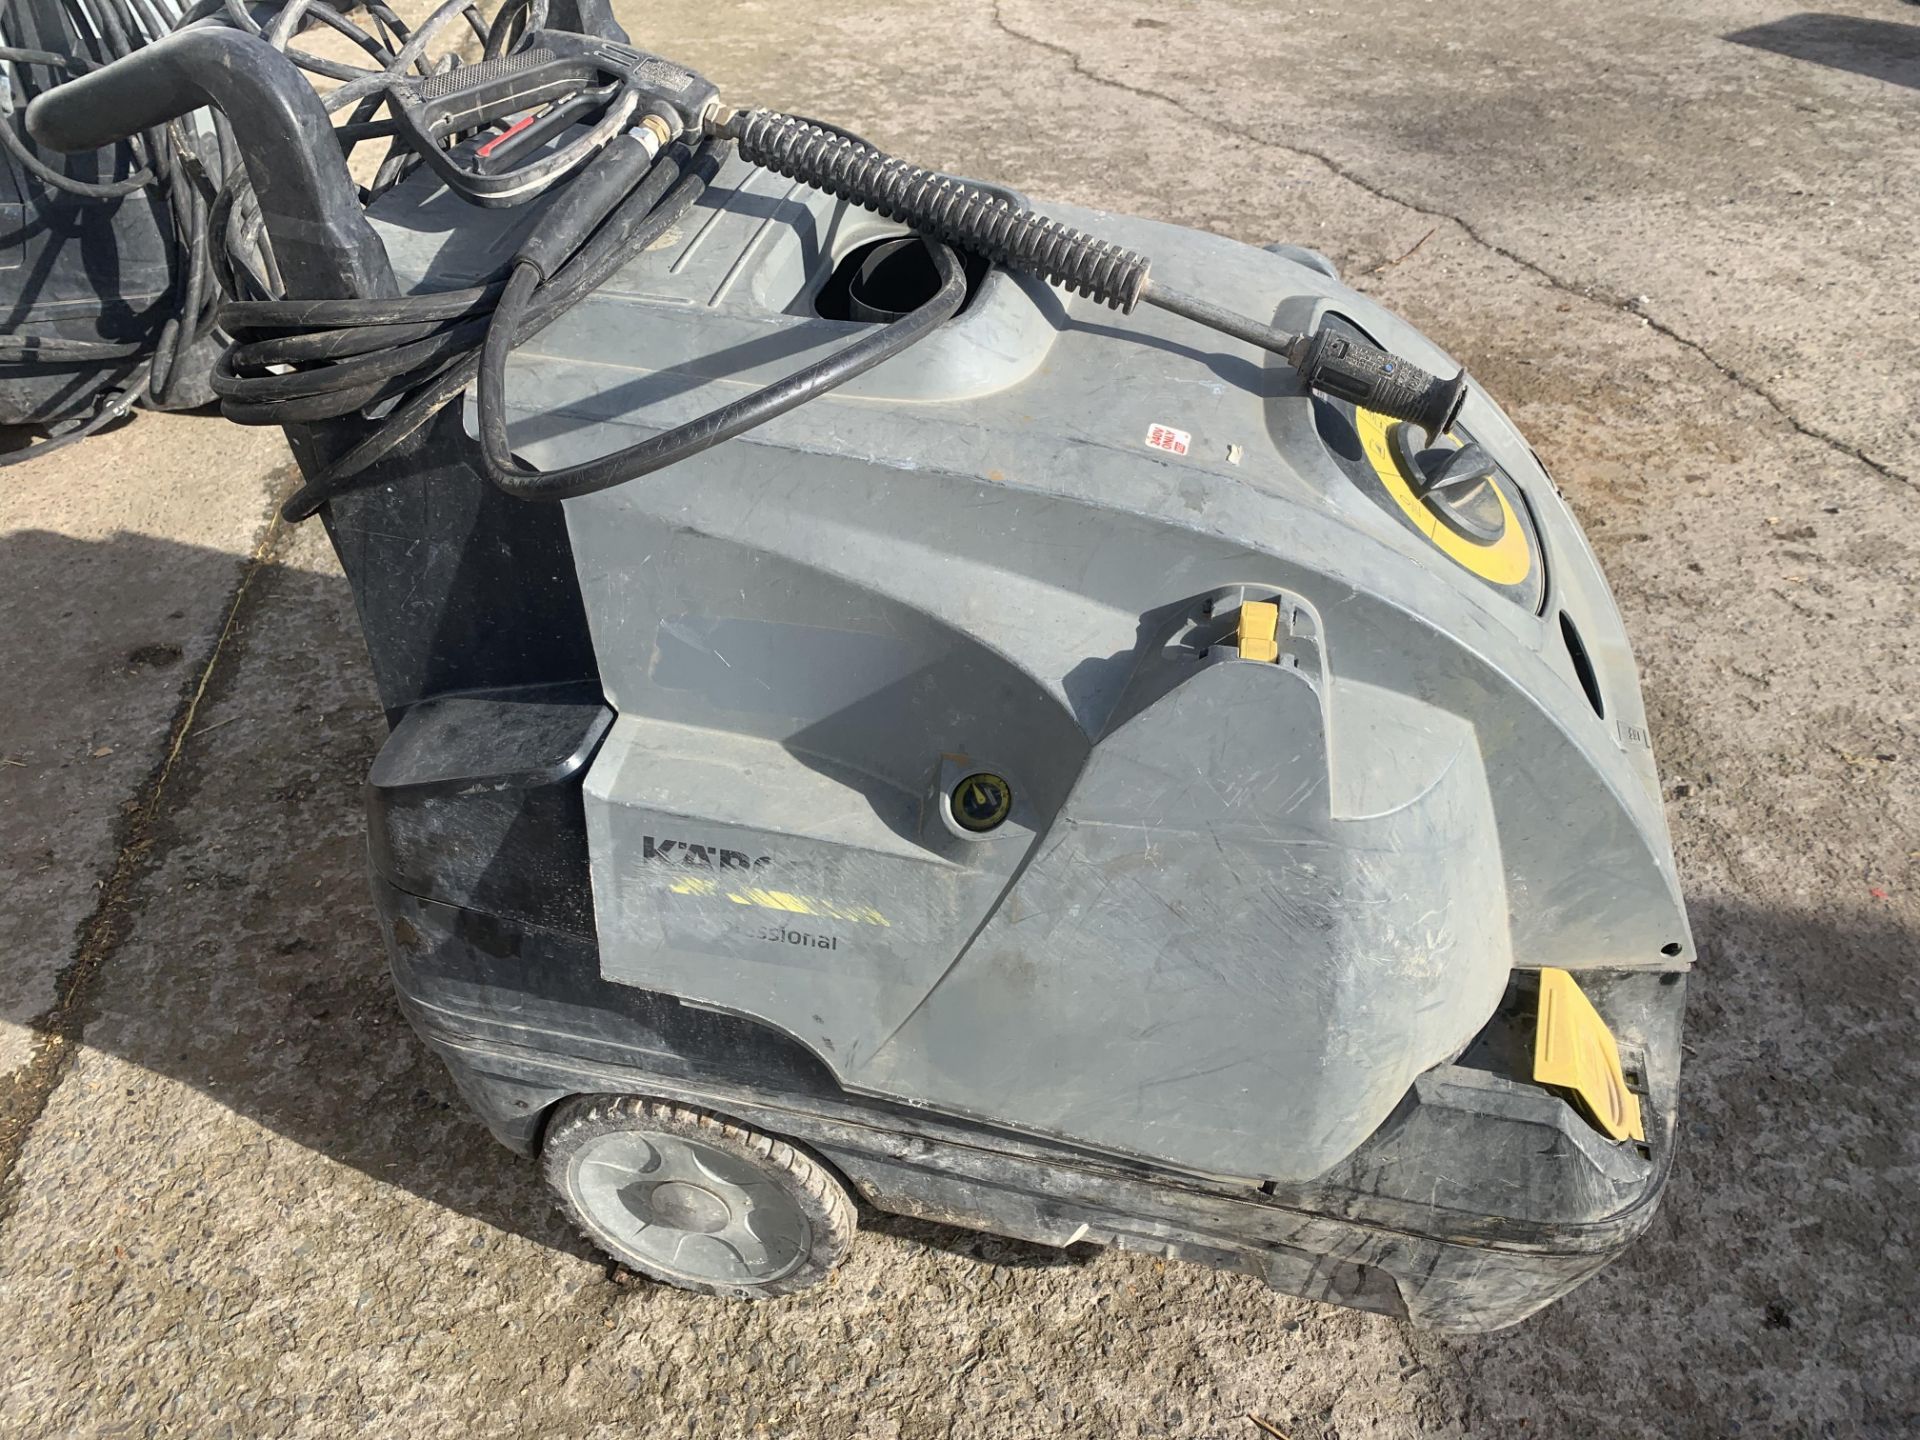 KARCHER DIESEL HOT AND COLD POWER WASHER LOCATION N IRELAND - Image 2 of 3